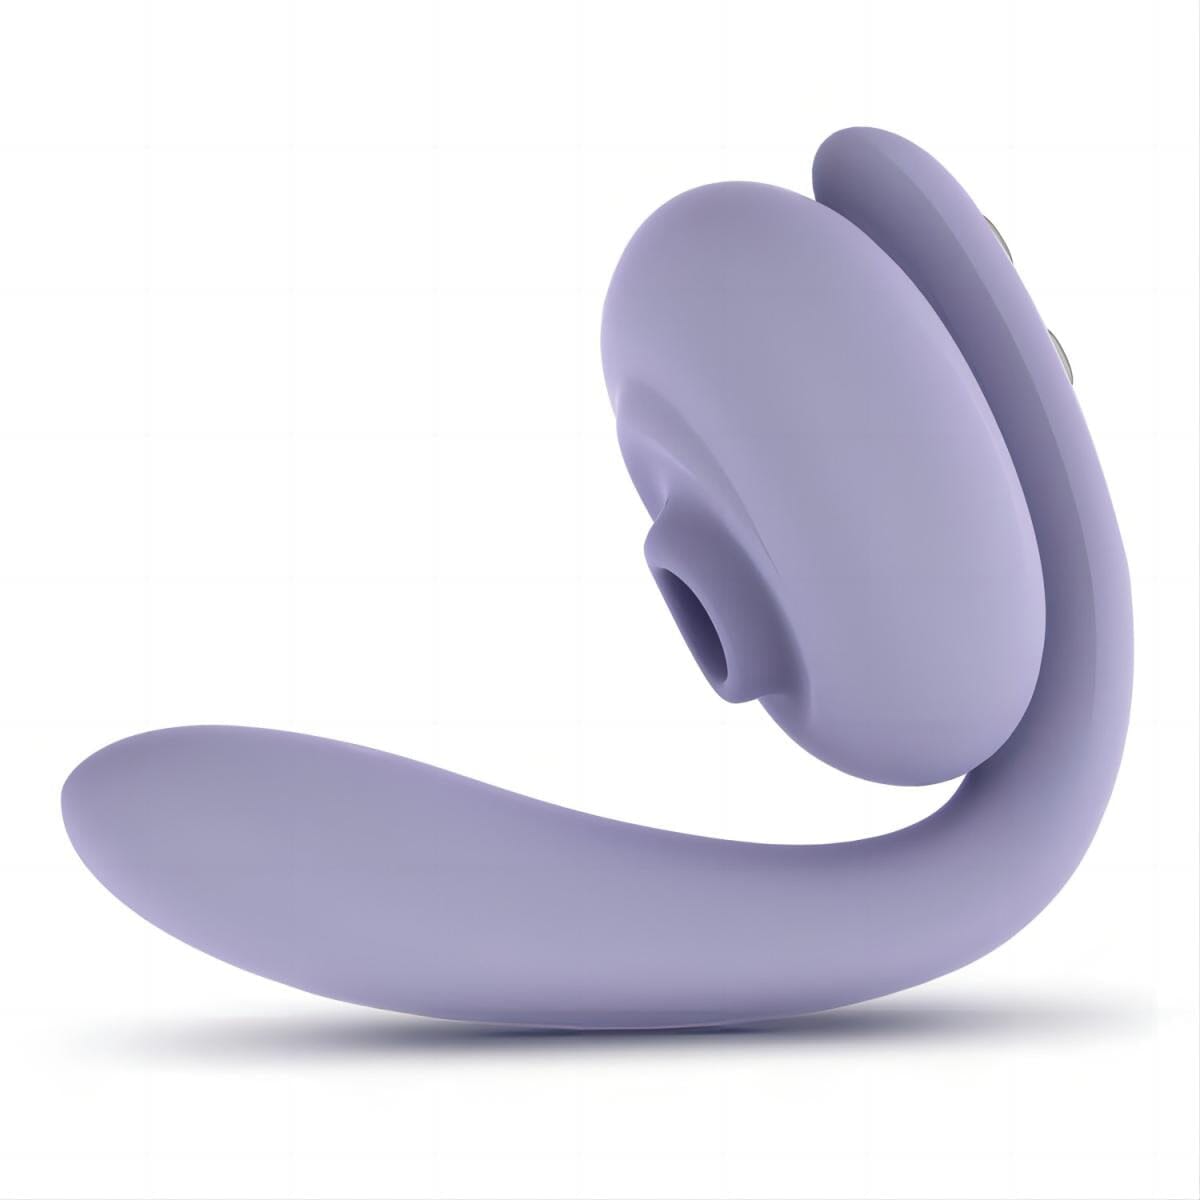 Tracy's Dog Toys – Long Island Institute of Sex Therapy (LIIST)